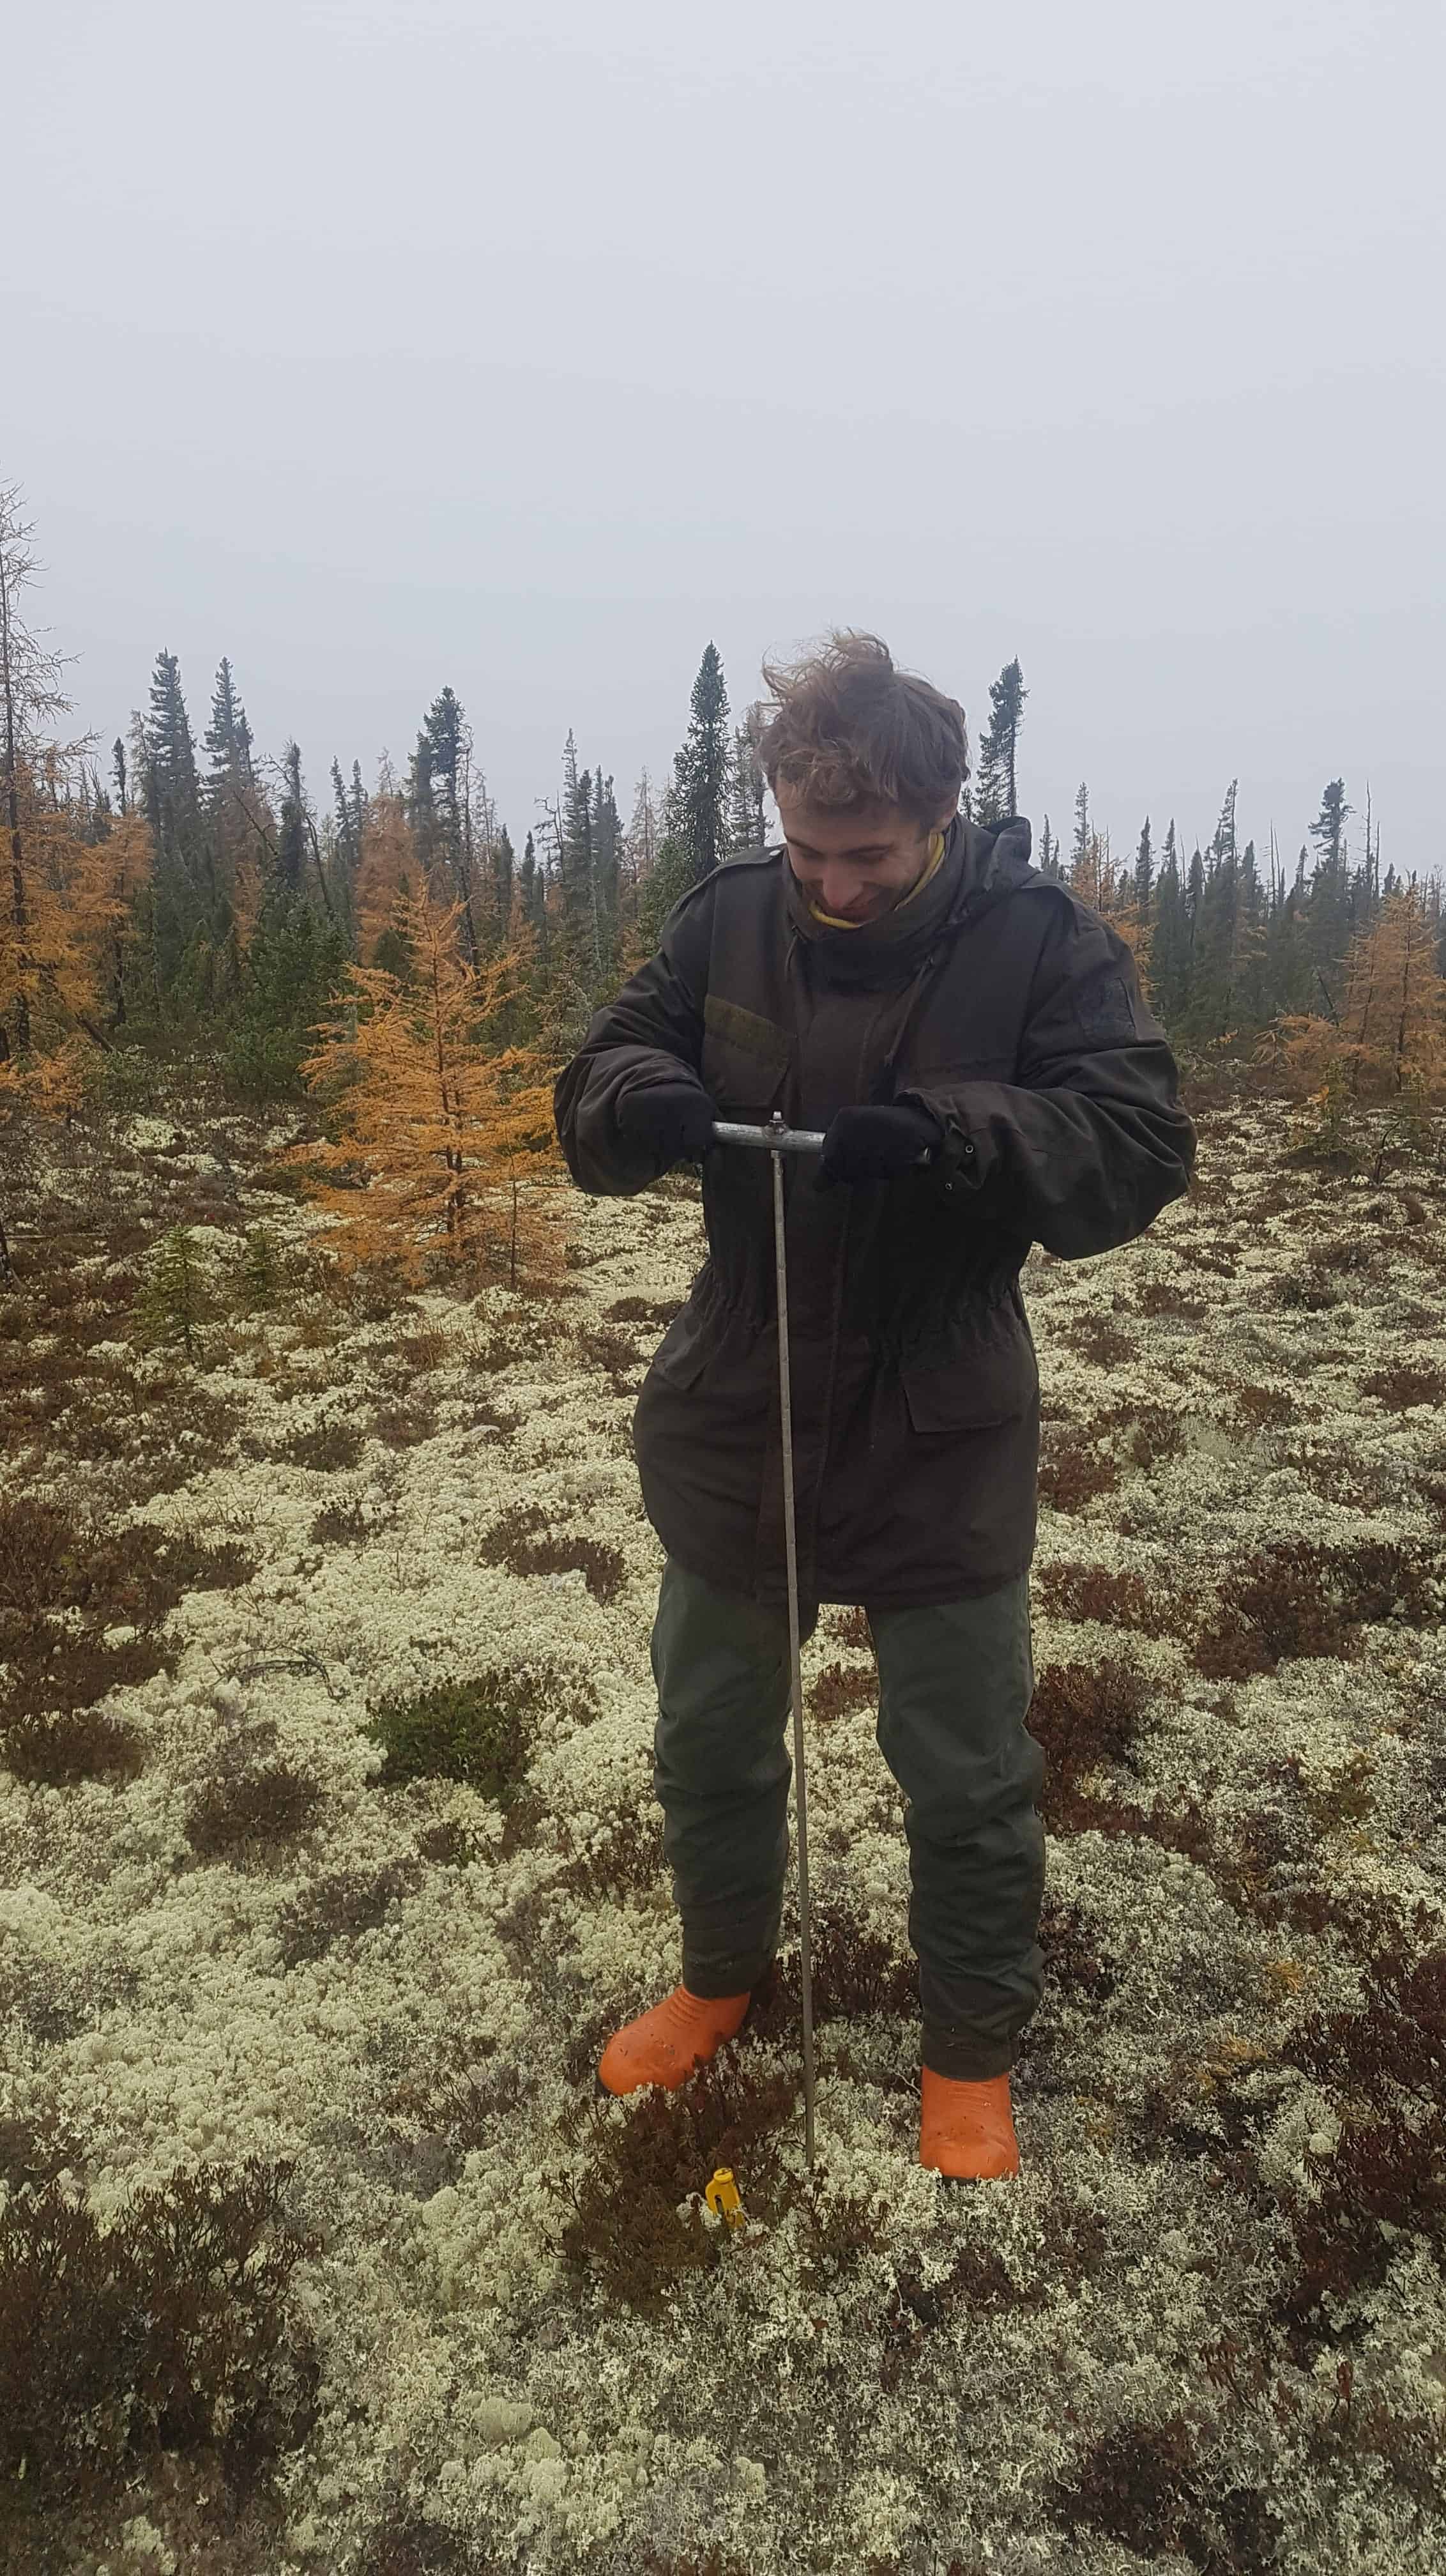 Using metal probes to check permafrost depth